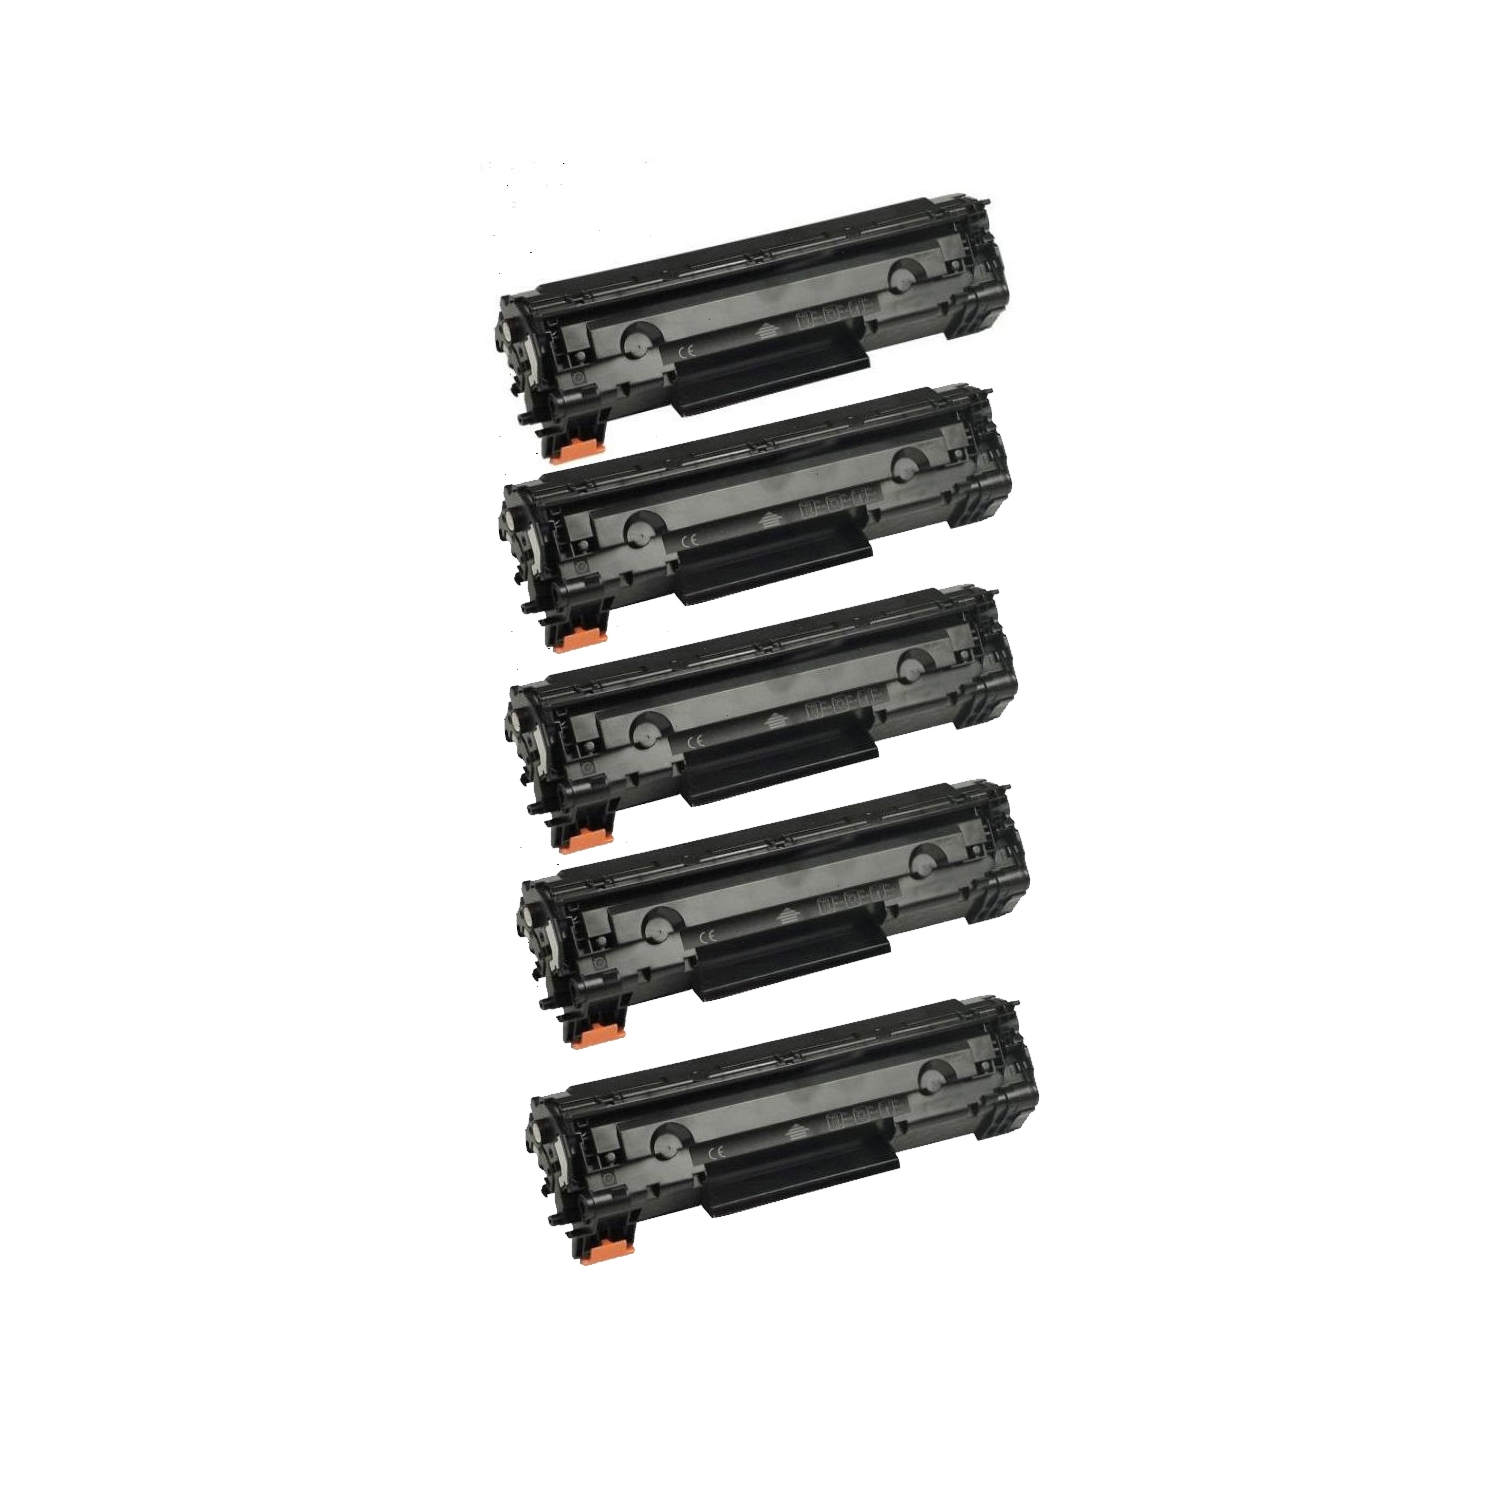 5Pack CRG128 Compatible Toner Cartridge for Canon 128 L100,D550,MF4412,MF4420n,MF4450,MF4550,MF4570dn,MF4580dn ,MF4770n ,MF4880dw,MF4890dw